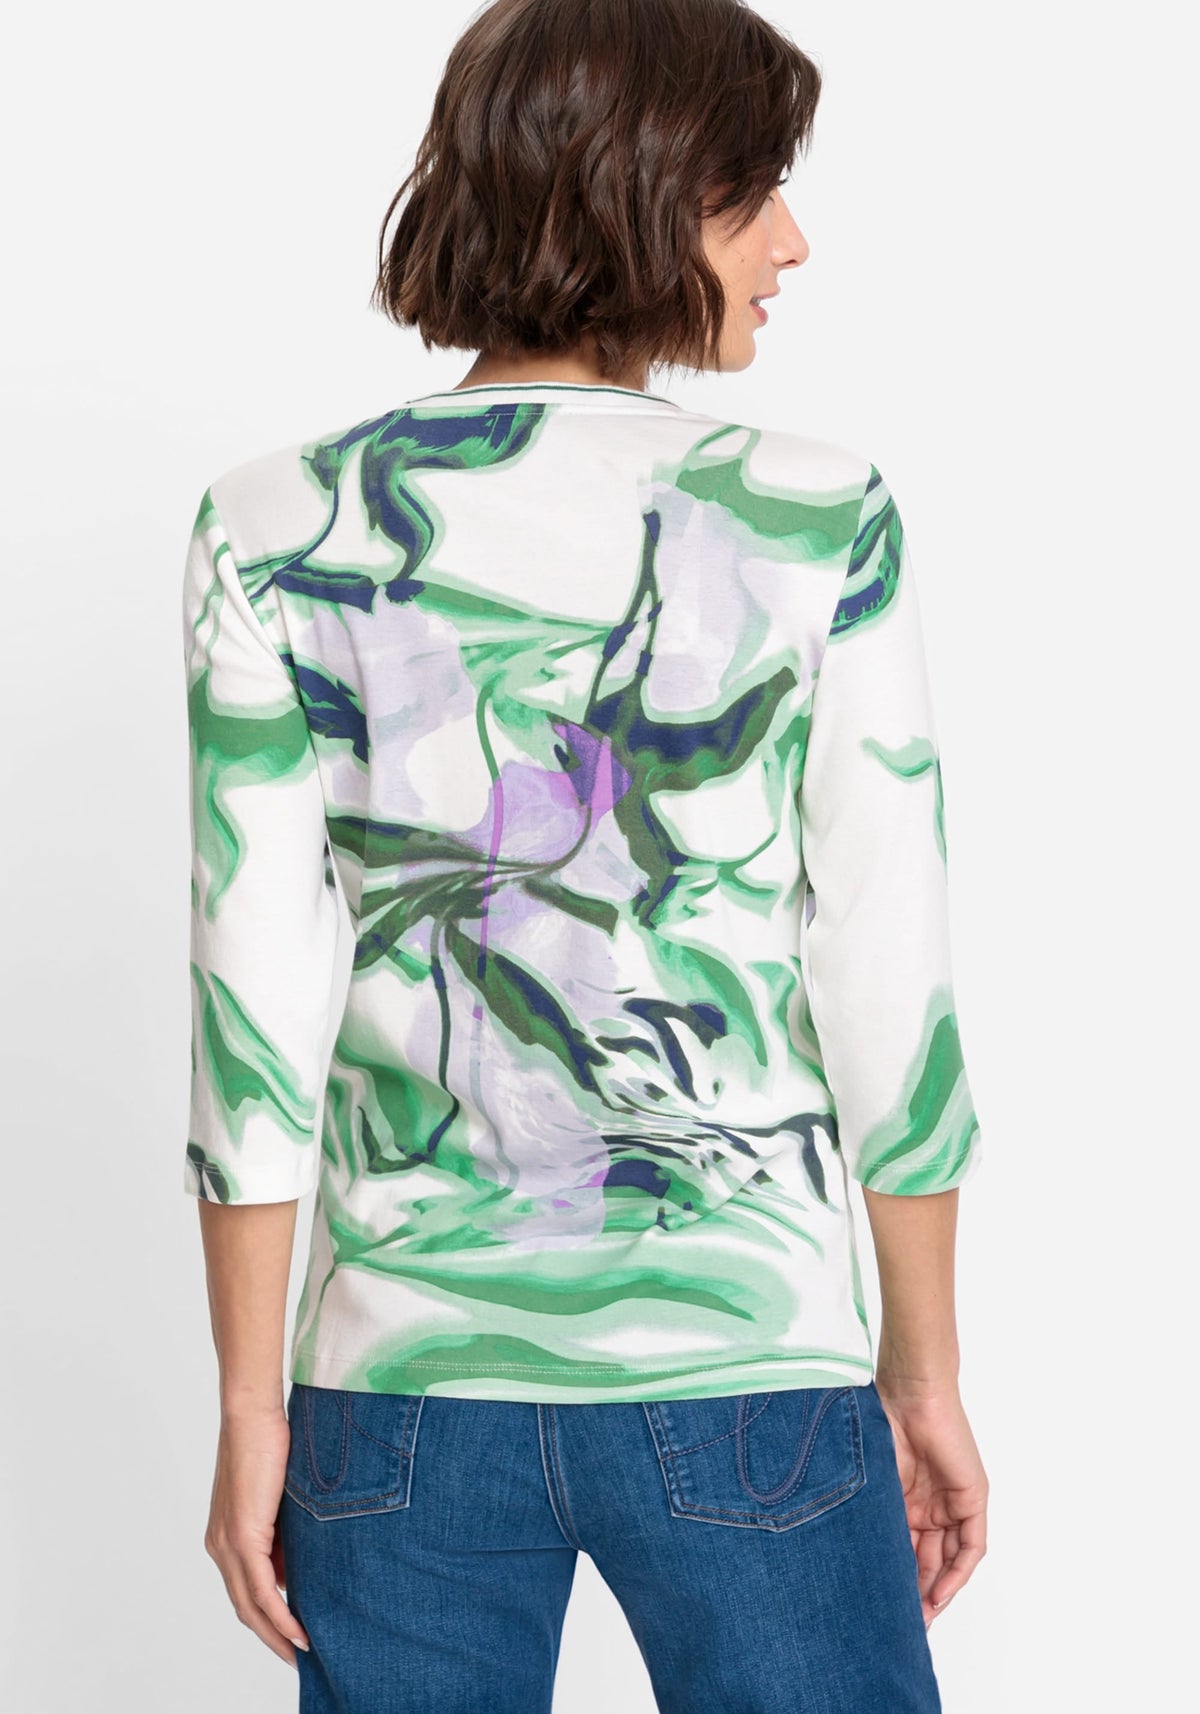 100% Cotton 3/4 Sleeve Watercolour Abstract Floral T-Shirt